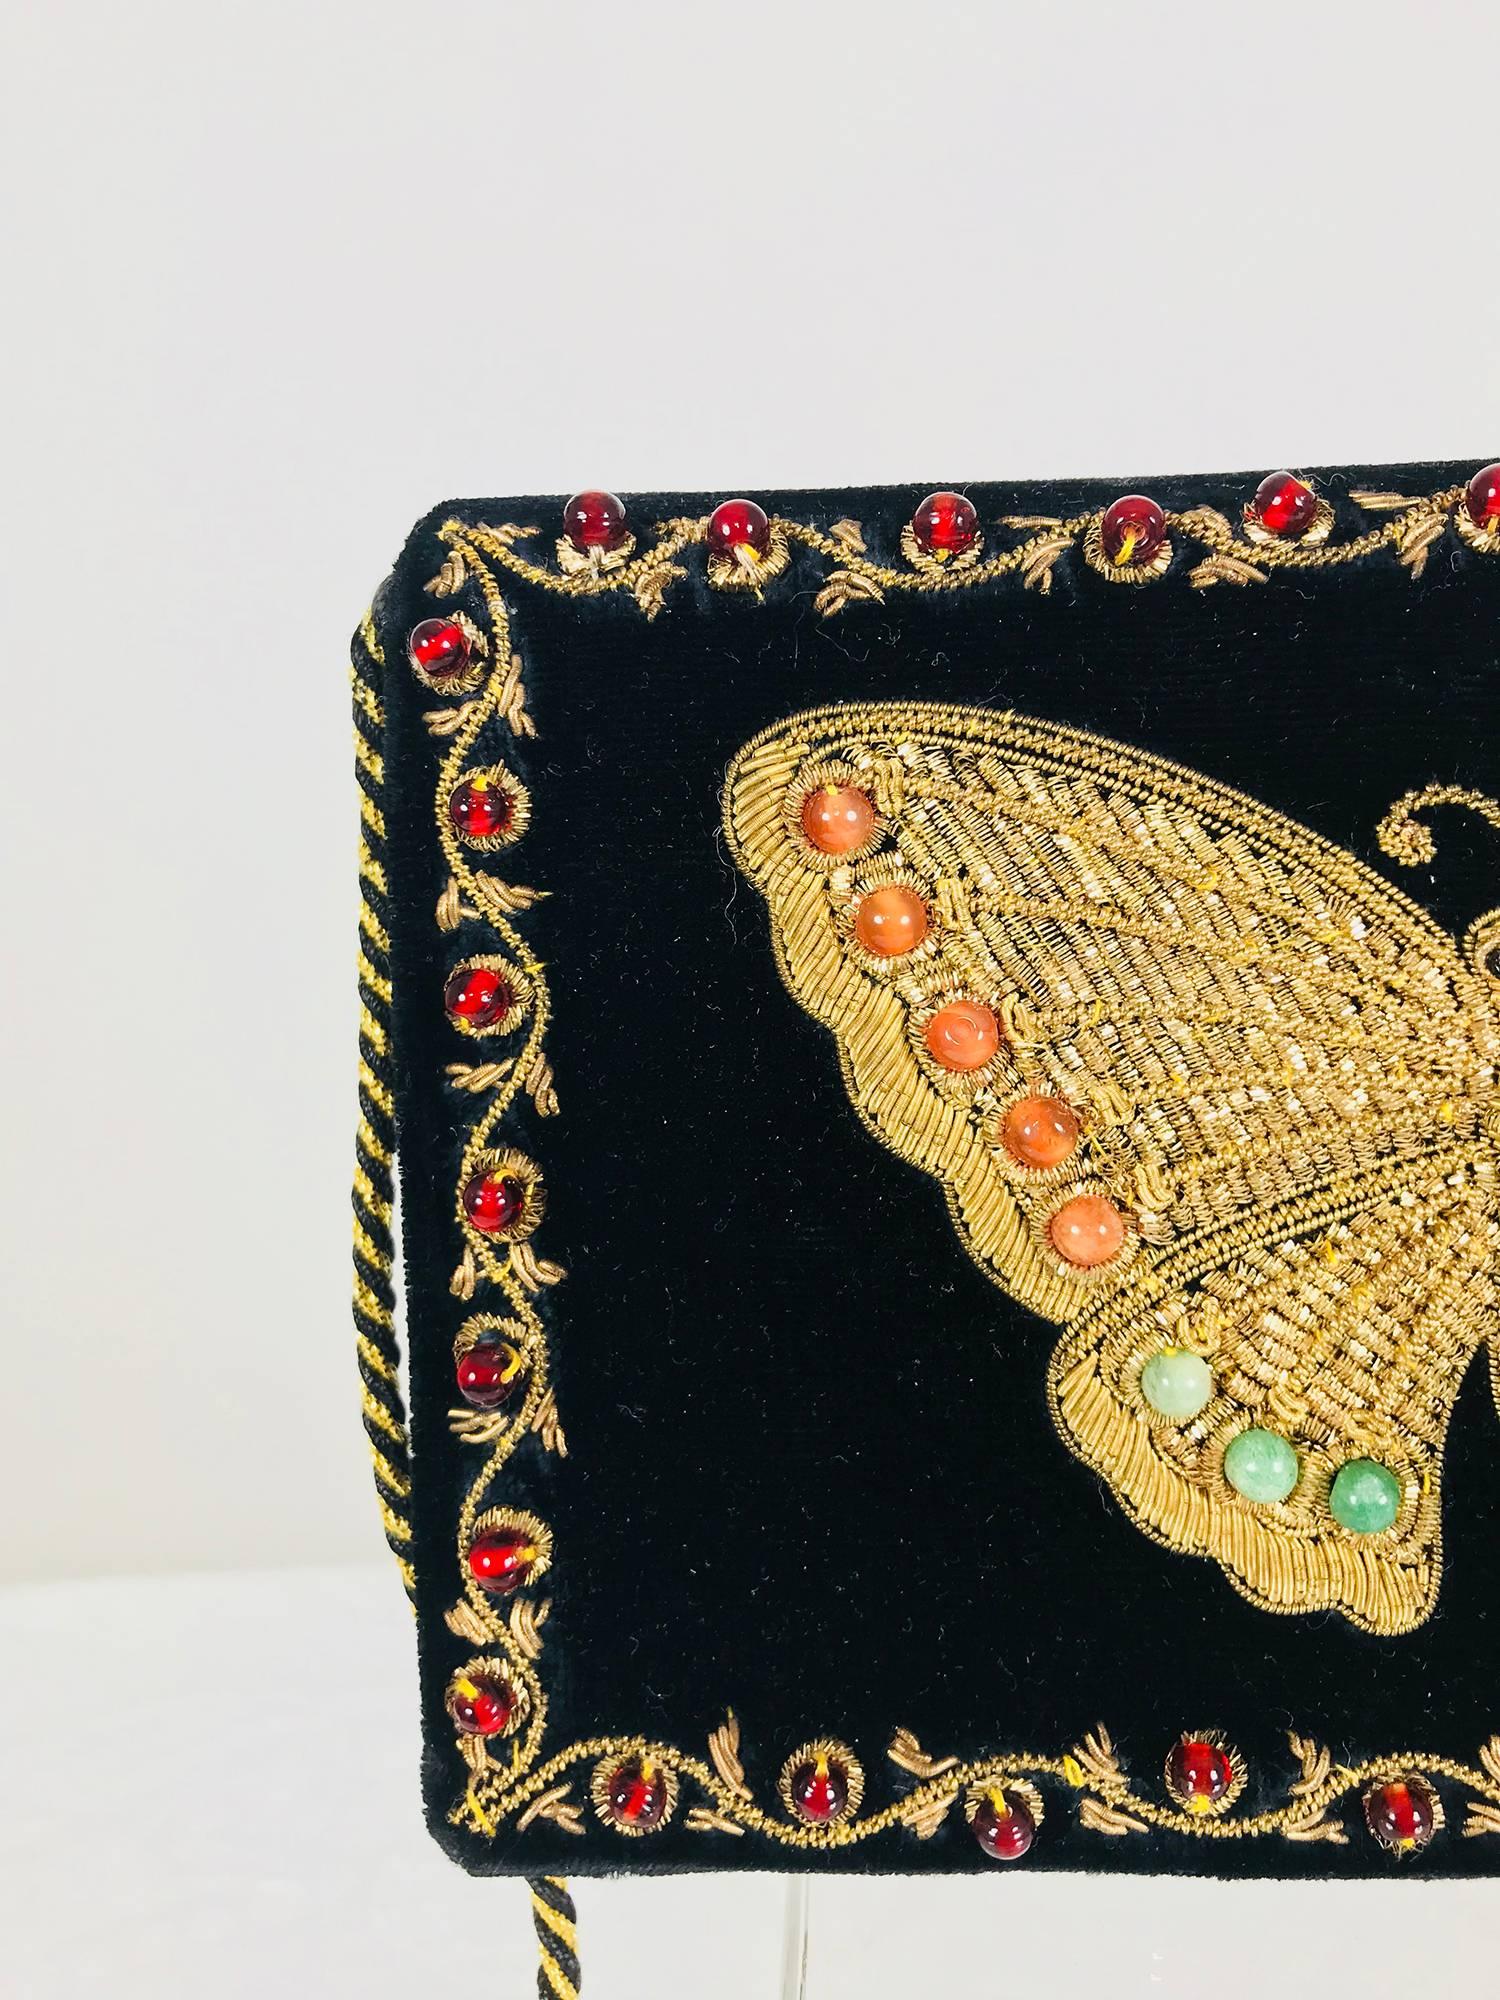 Black Jewel bead gold bouillon embroidered butterfly evening bag 1970s